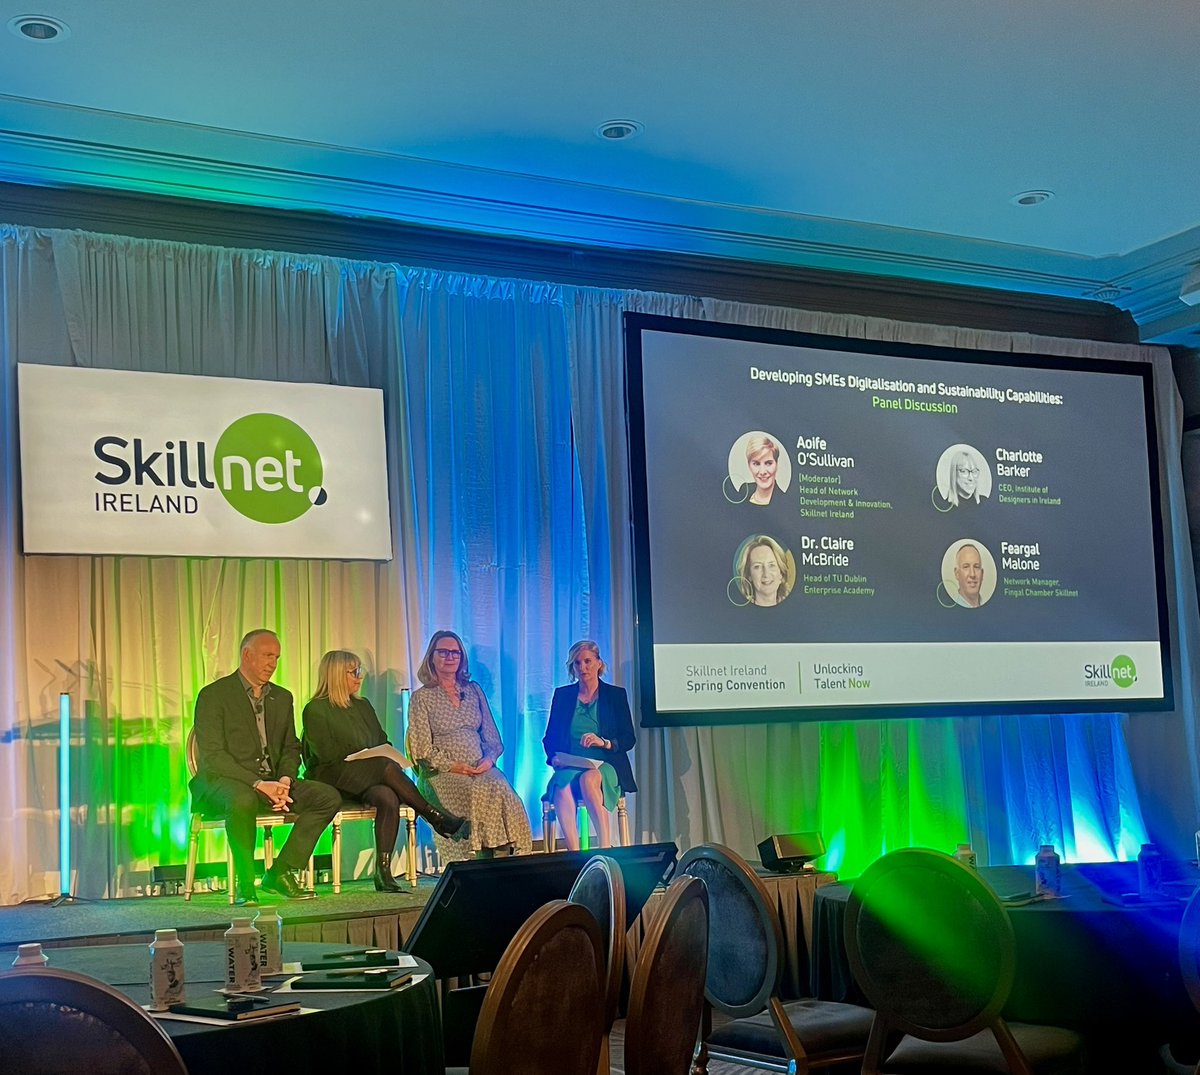 #DigitalTransformation and the critical link between industry and academia, including domain expertise was a key topic during the panel discussion, led by Aoife O’Sullivan, Head of Network Development and Innovation @SkillnetIreland with Claire McBride @WeAreTUDublin Enterprise…